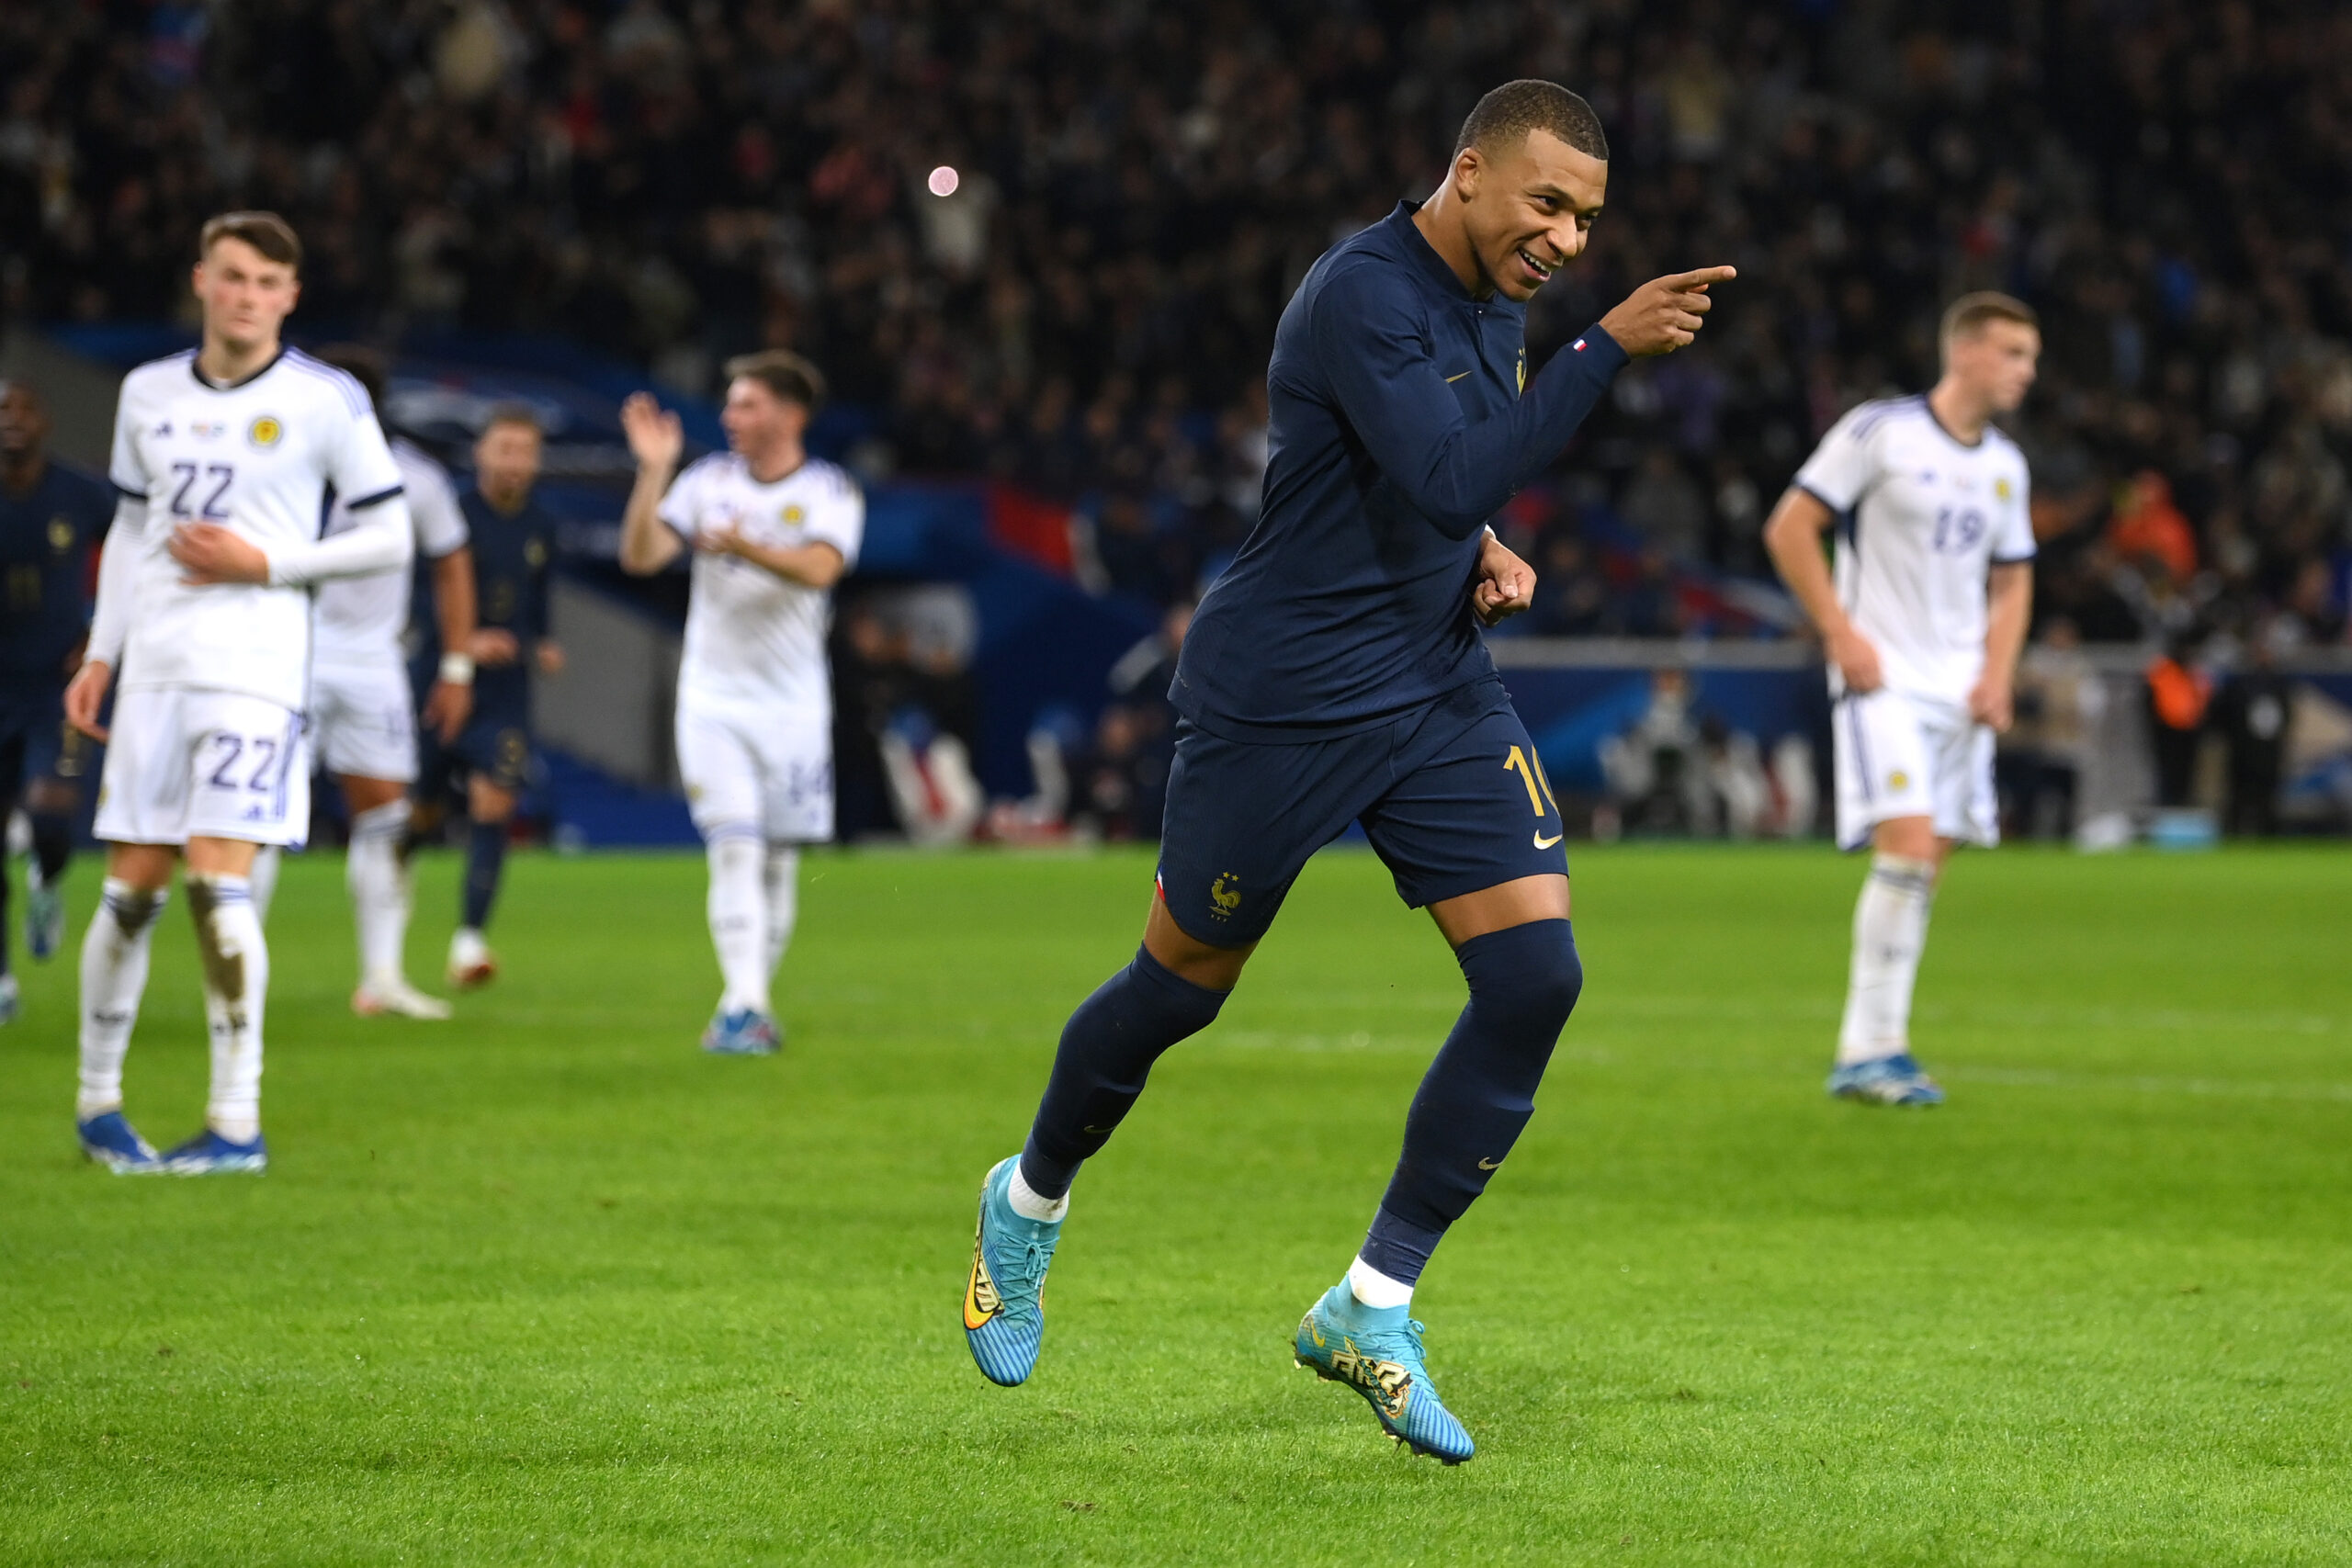 LILLE, FRANCE - OCTOBER 17: Kylian Mbappe of France celebrates after scoring during the International Friendly match between France and Scotland at Decathlon Arena on October 17, 2023 in Lille, France. (Photo by Mike Hewitt/Getty Images)